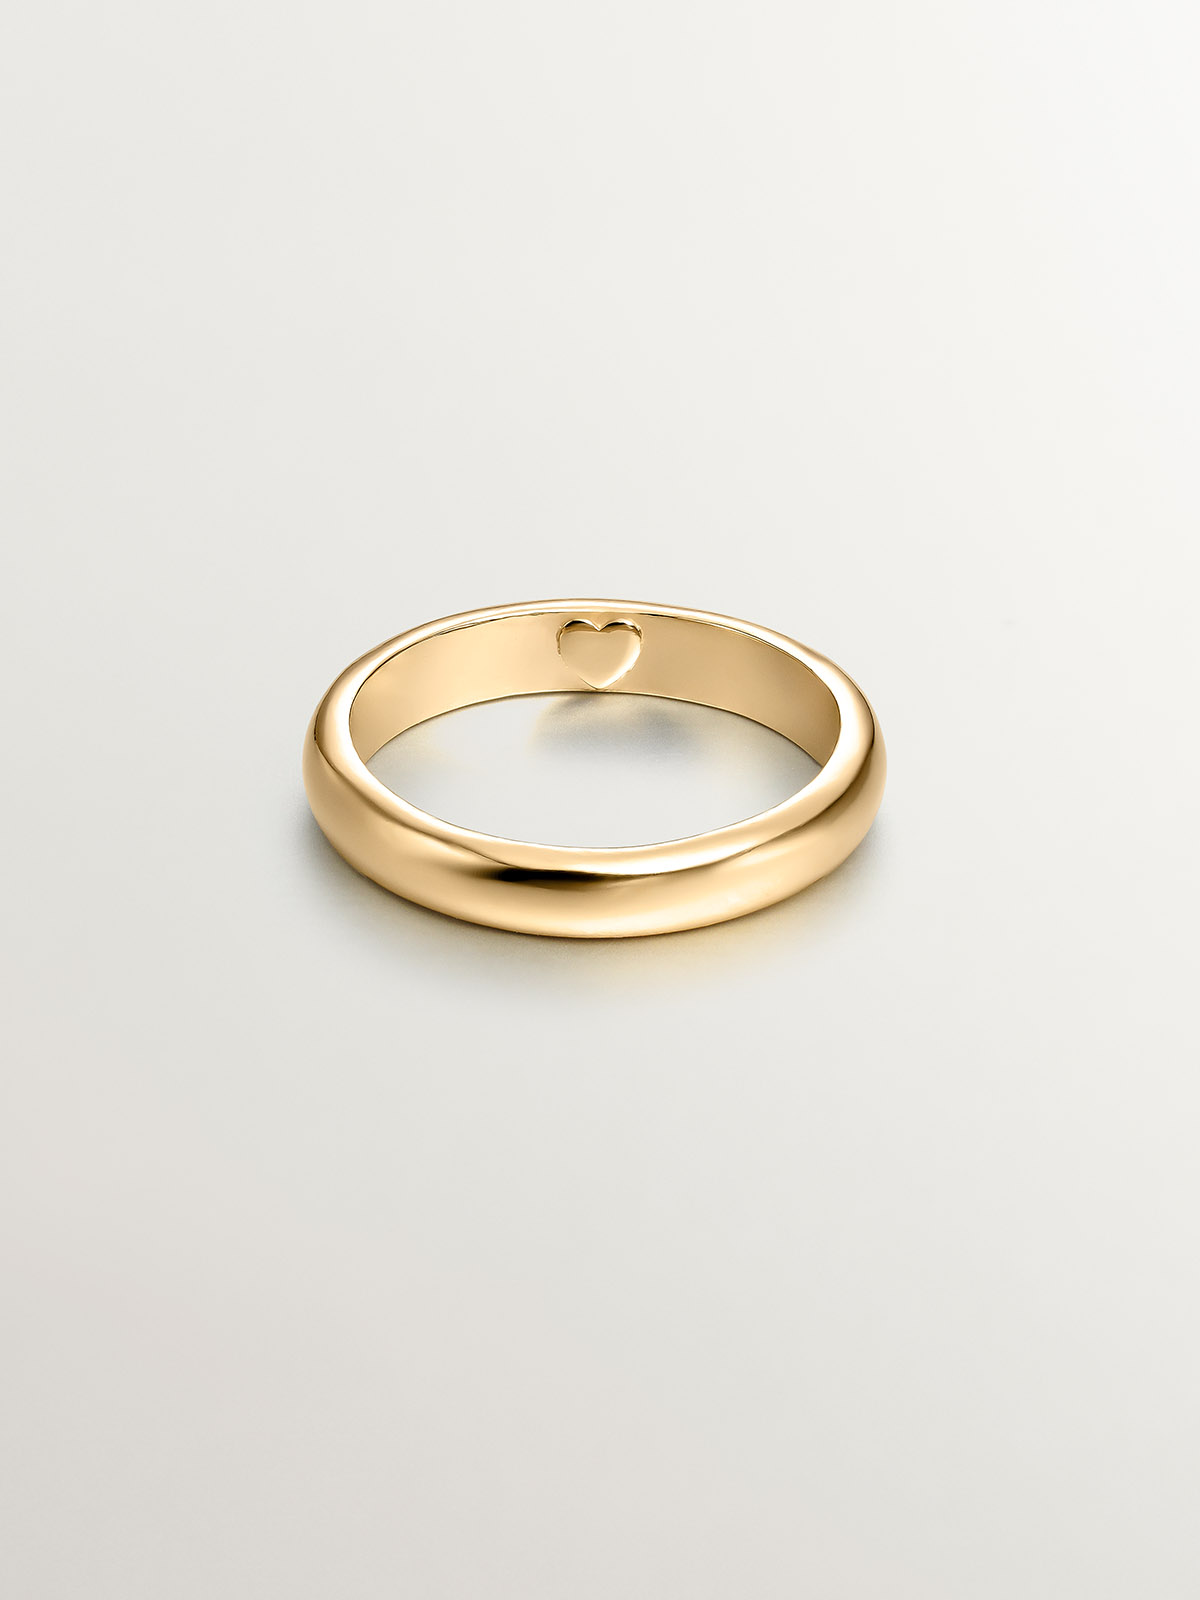 925 Silver band-style ring bathed in 18K yellow gold with an internal heart.